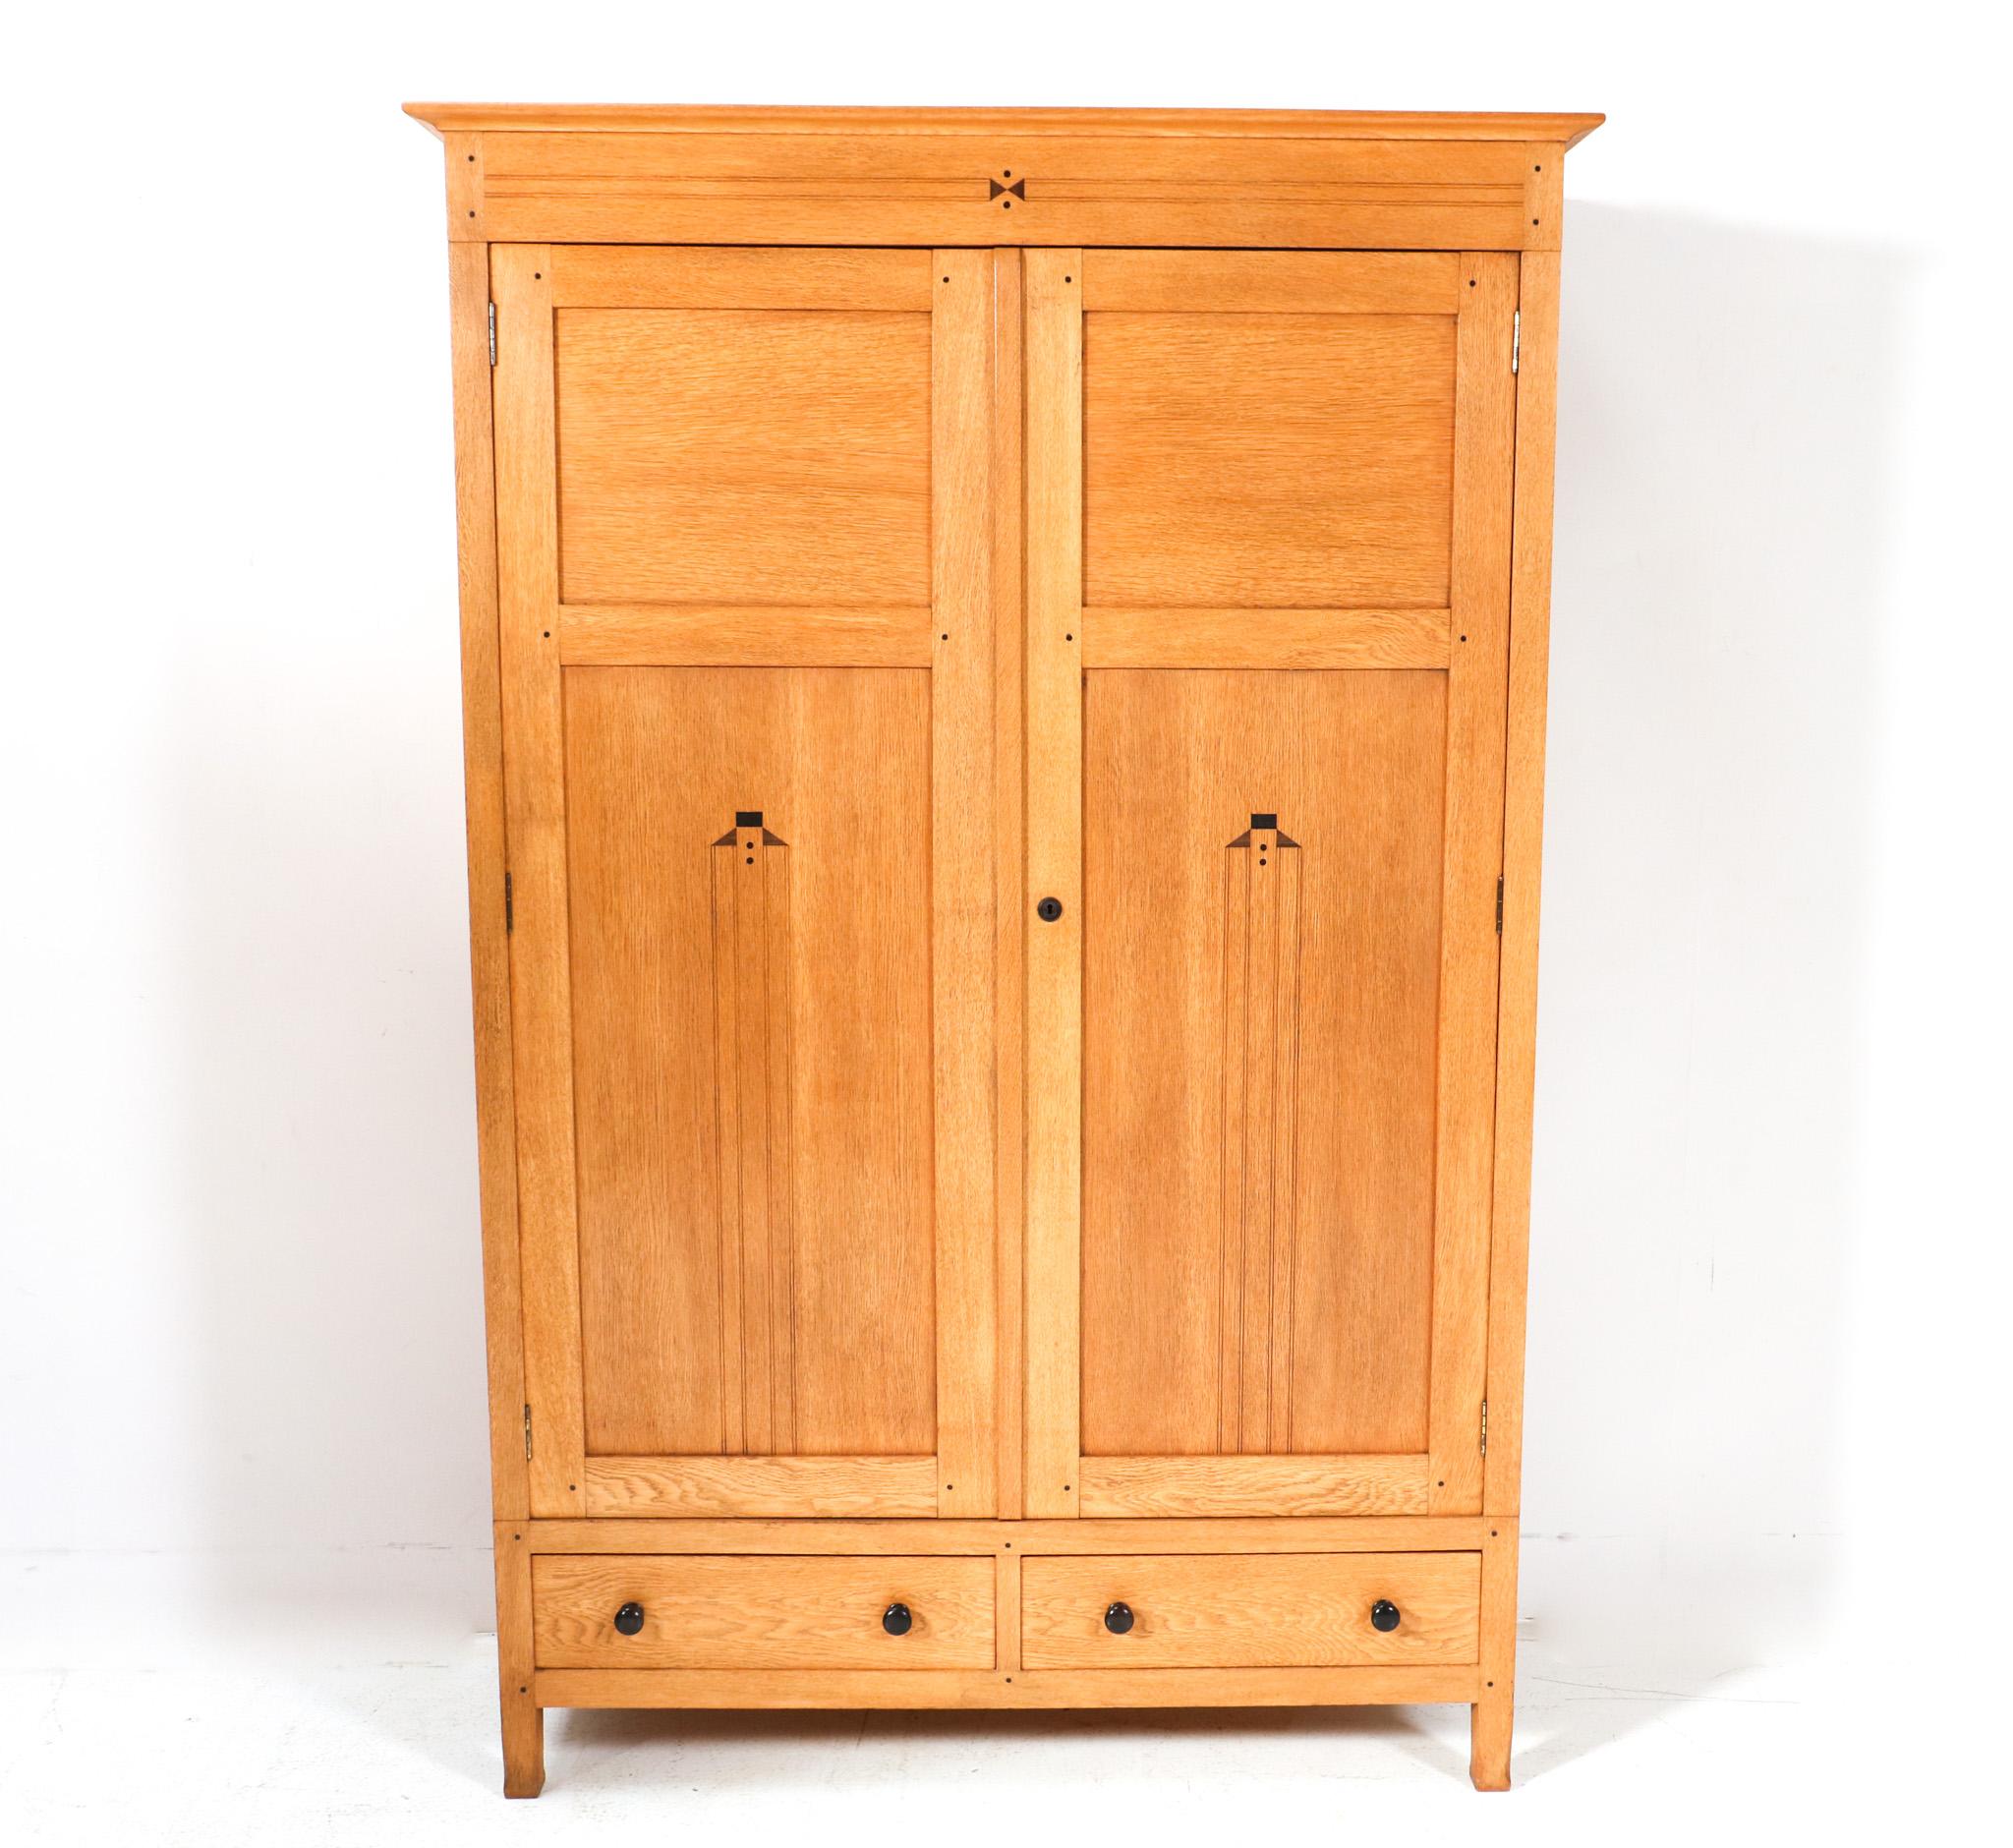  Arts & Crafts Art Nouveau Armoire or Wardrobe by Jac. van den Bosch, 1904 In Good Condition For Sale In Amsterdam, NL